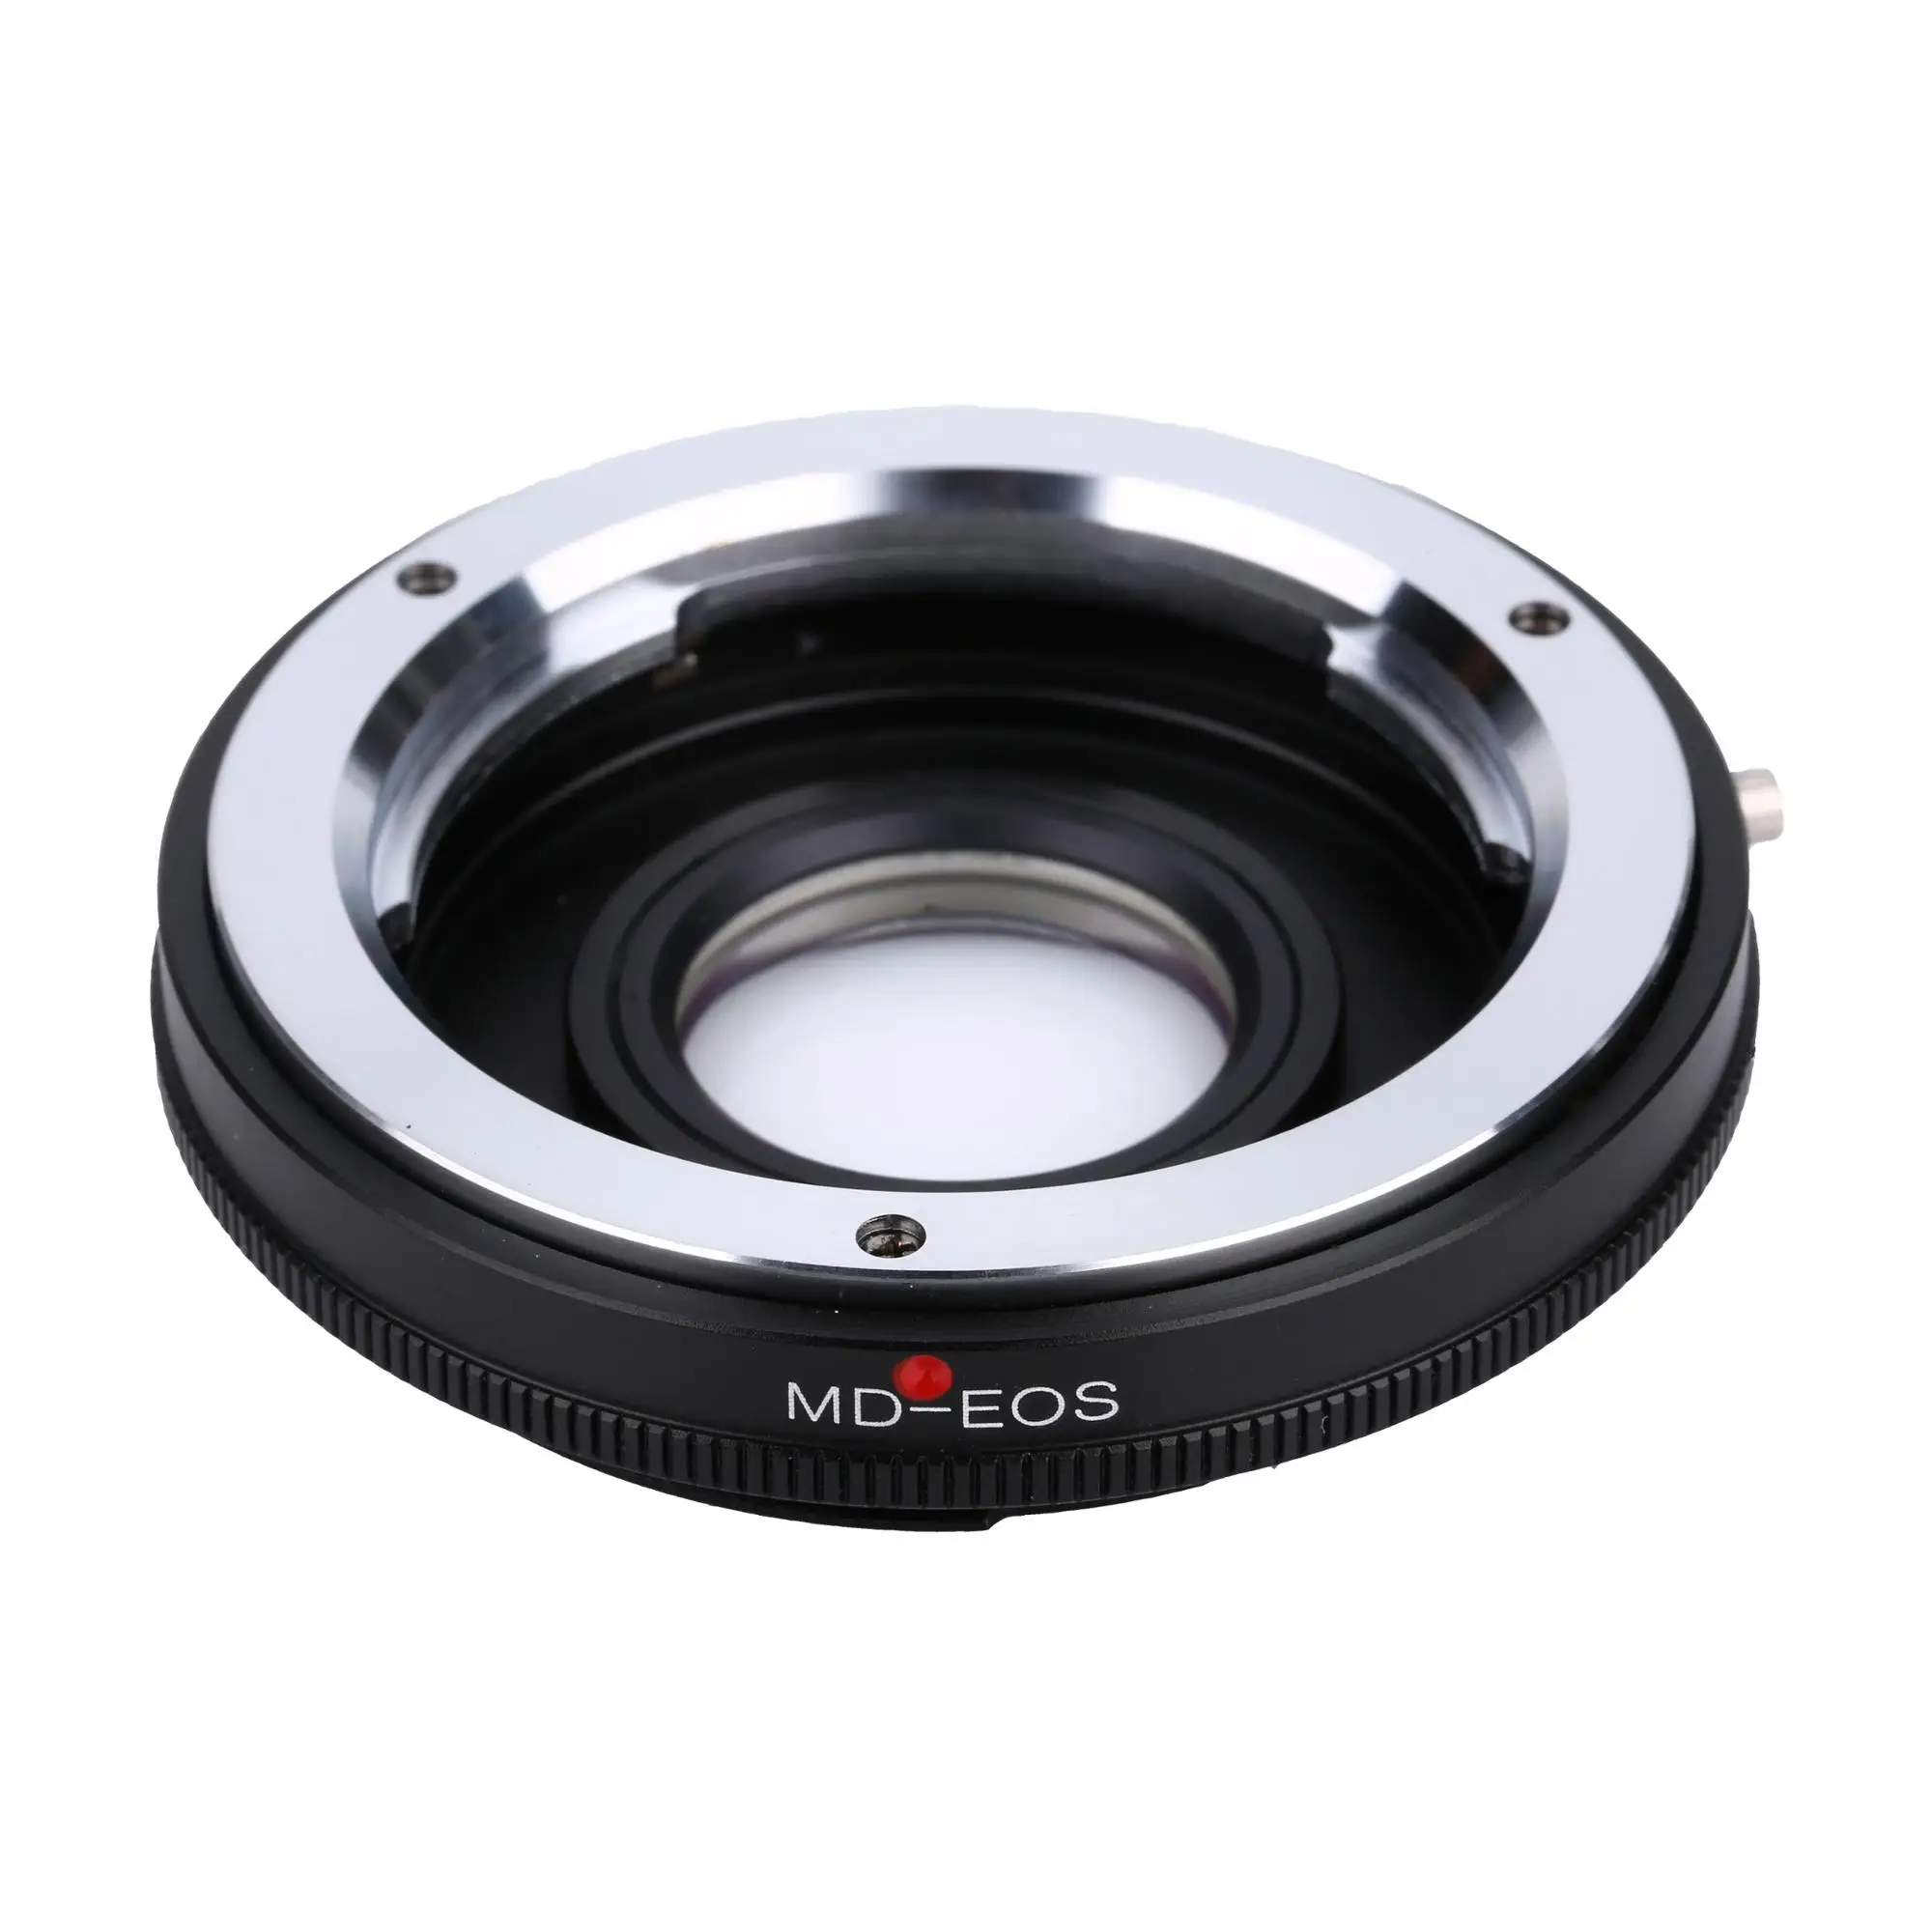 lens adapter for MD-EOS with glass.jpg